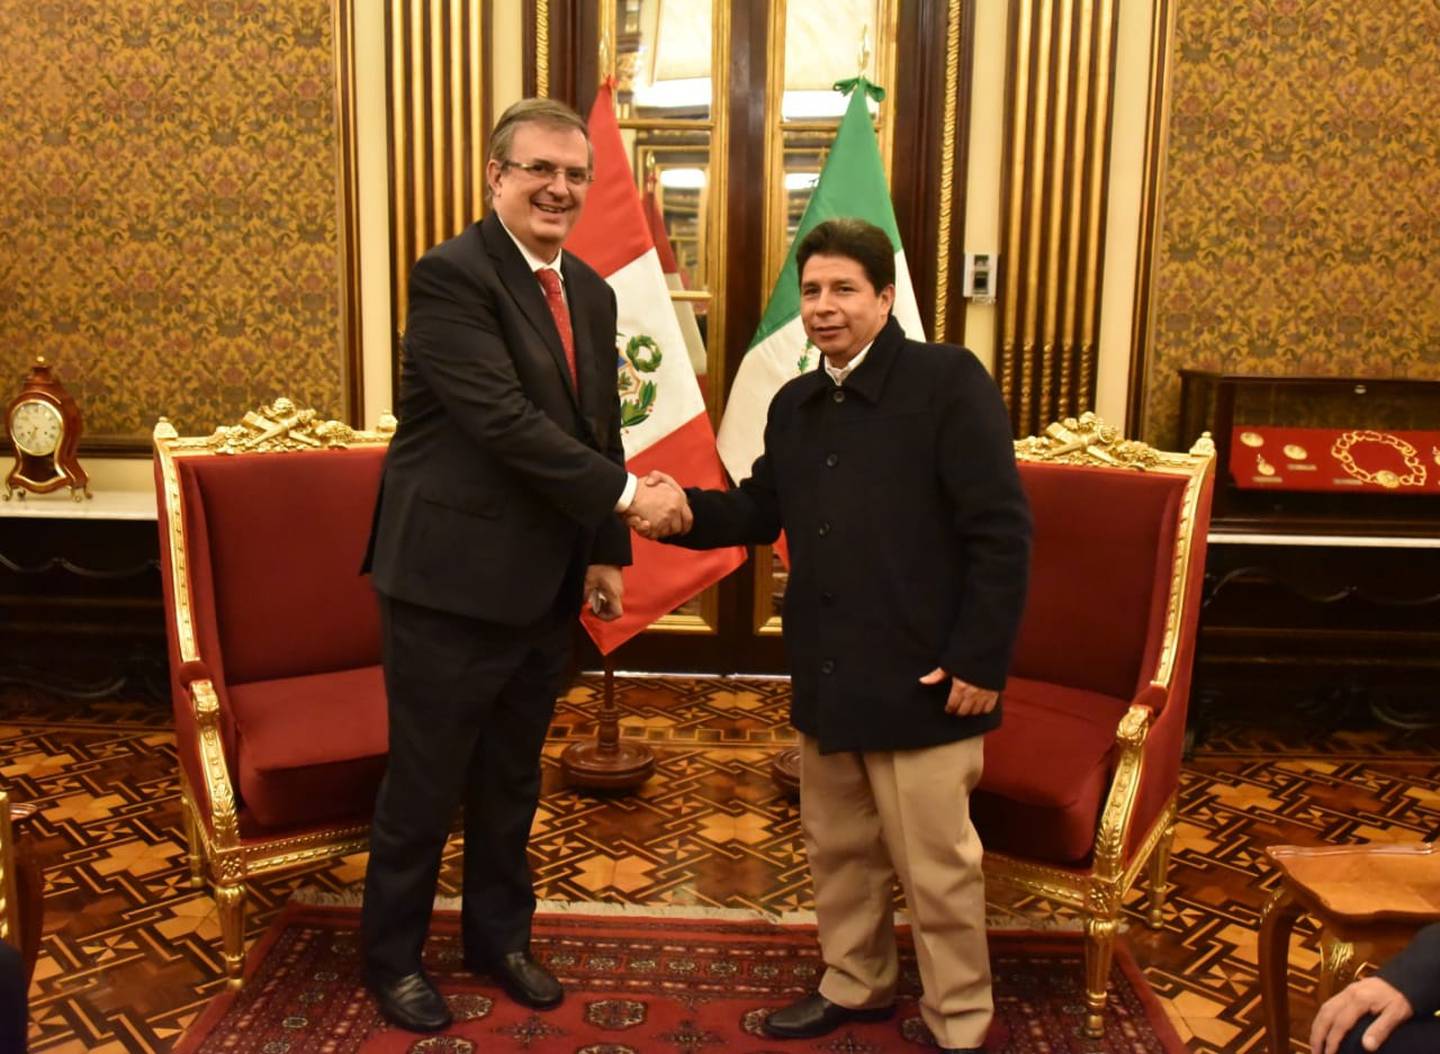 Mexico's Foreign Minister Marcelo Ebrard with Peru's former president Pedro Castillo, on August 4, 2022, during Ebrard's visit to Peru. (Photo courtesy of the government of Mexico)